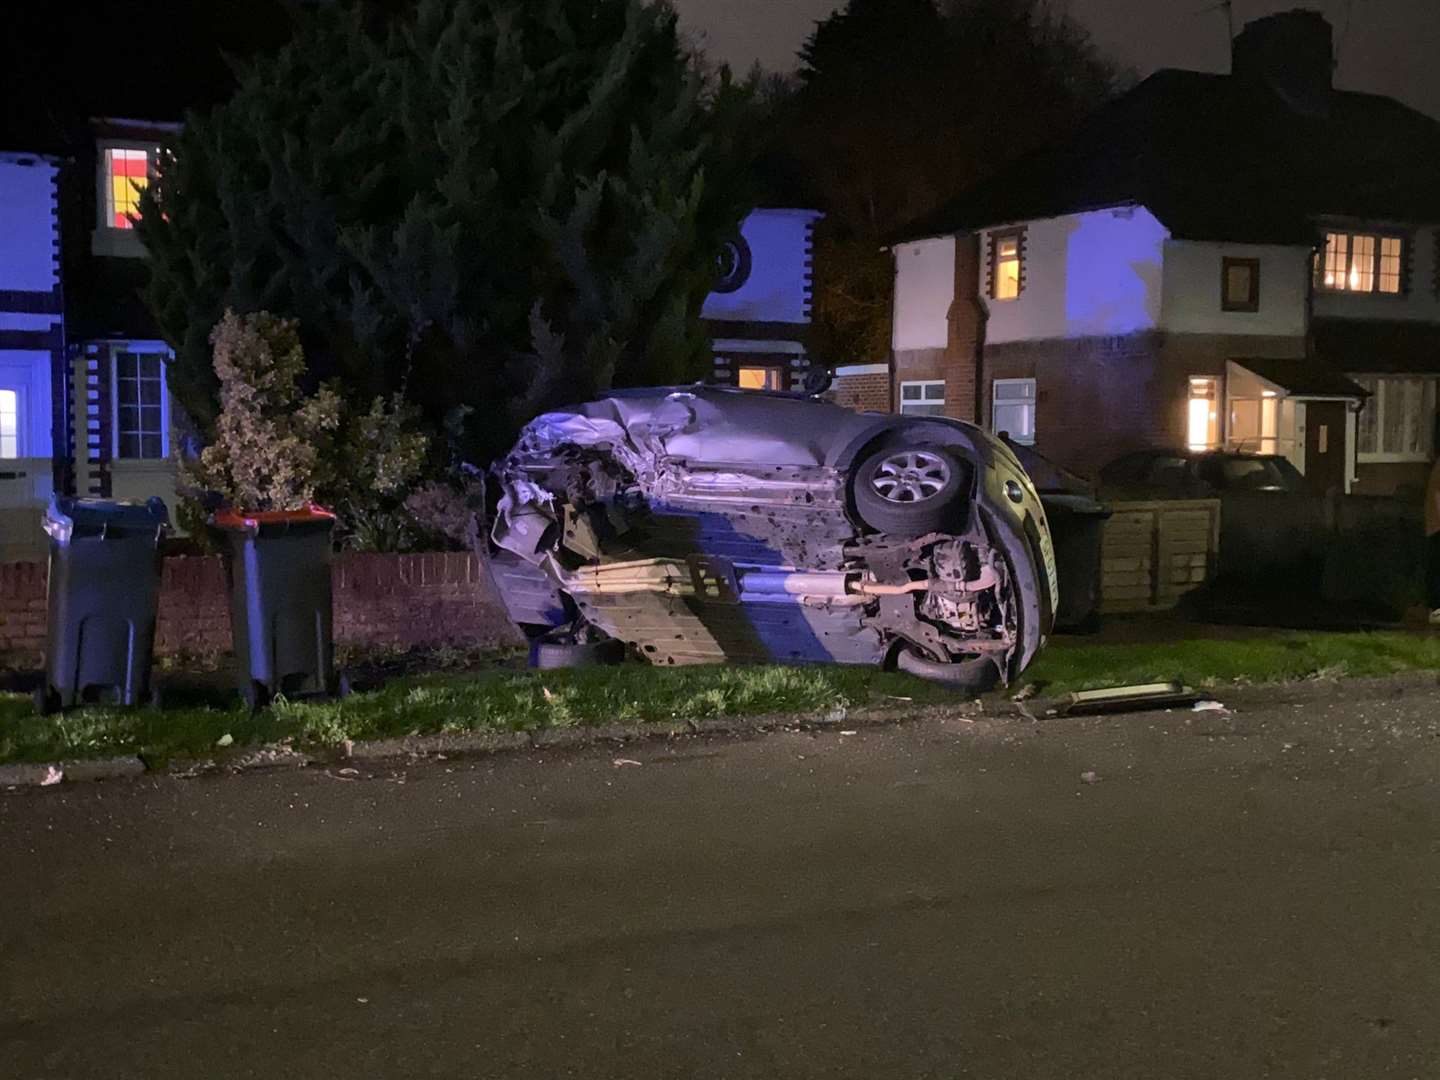 A car was seen overturned on the residential street